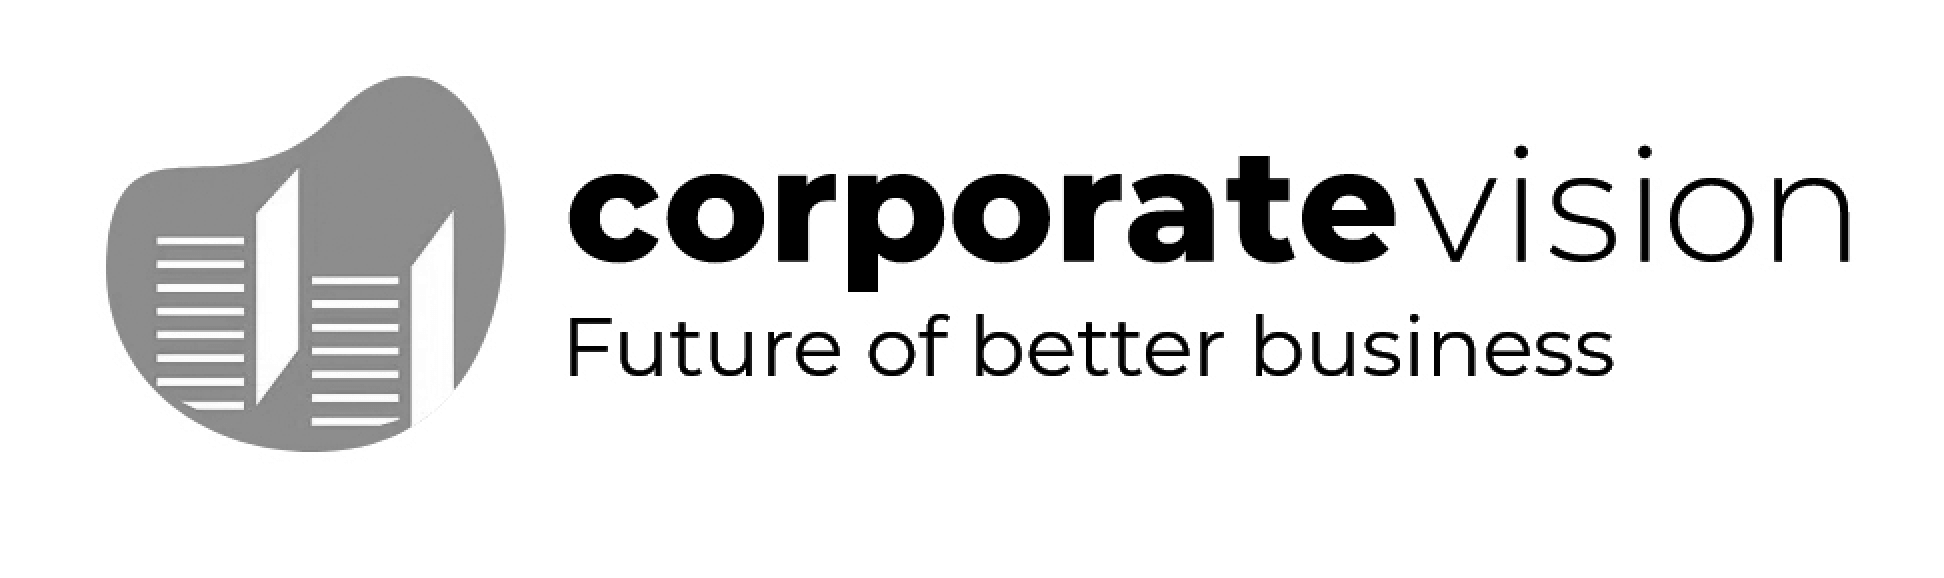 Most outstanding Agile Transformation Companies in the Netherlands by Corporate Vision Magazine 2021 